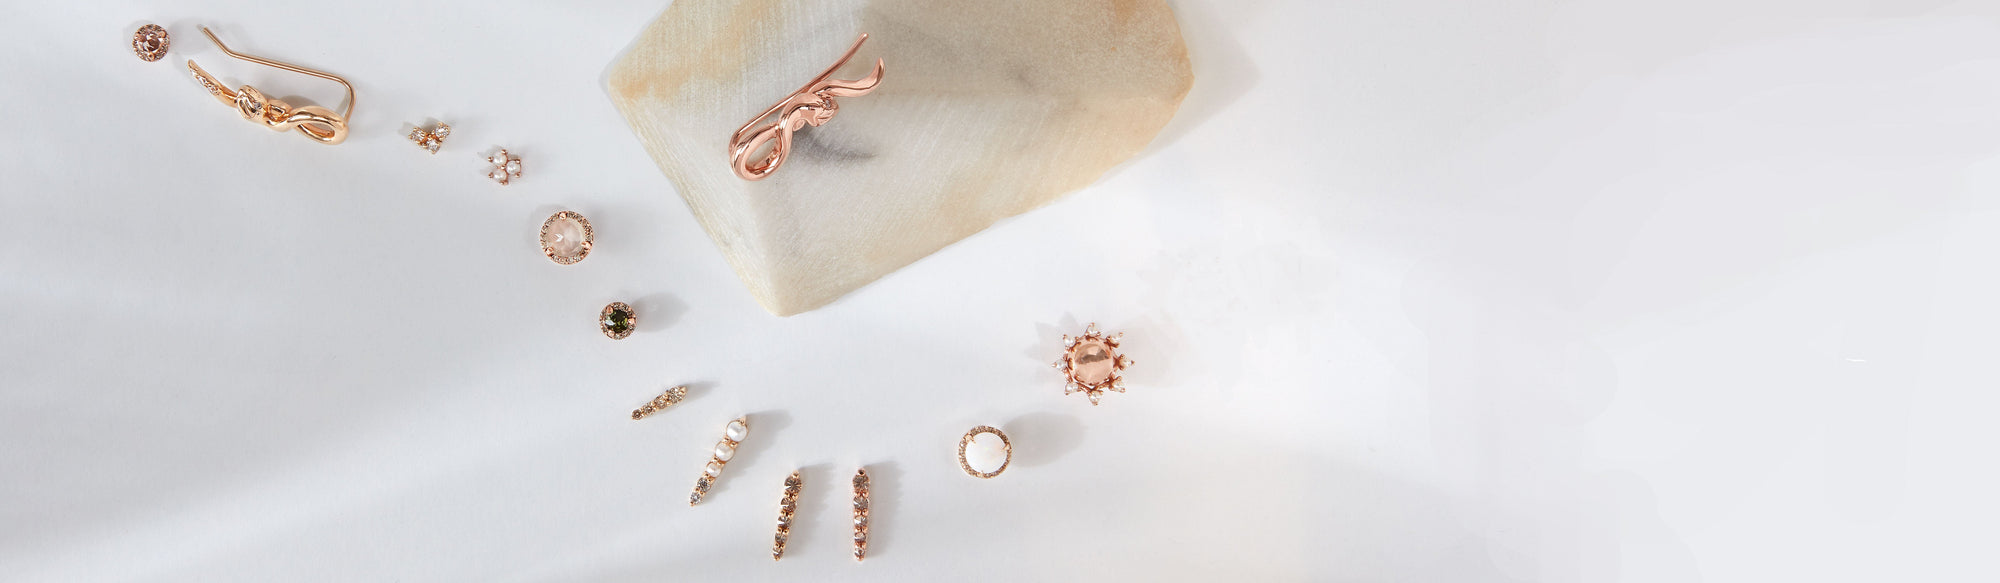 An array of stud earrings curved around a tan stone on a grey background.